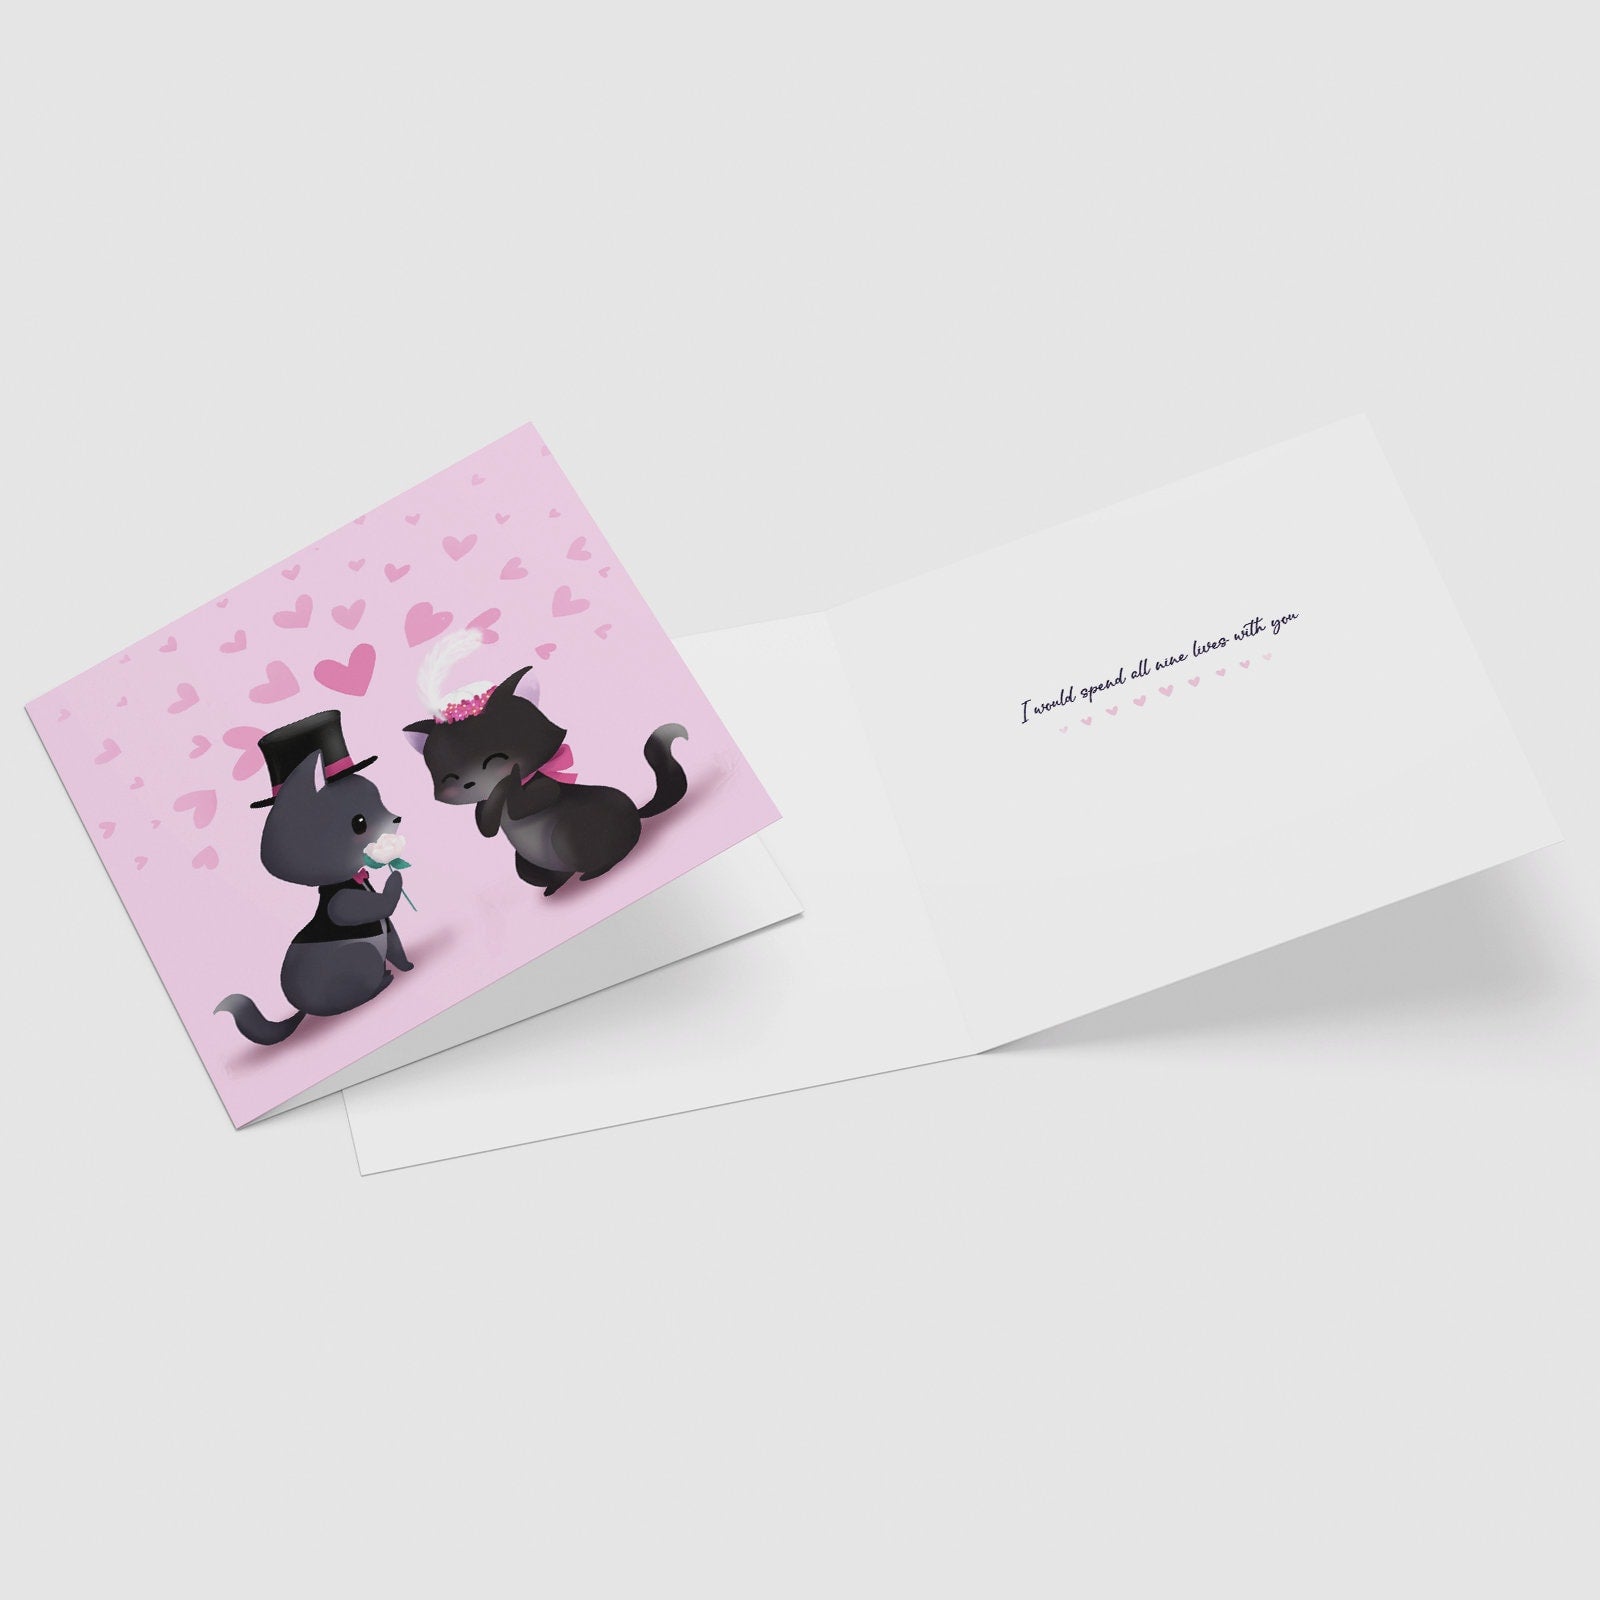 Valentines Day Card - Kitty Love in the Moonlight, "I Love You to the Moon & Back" - Greeting Card